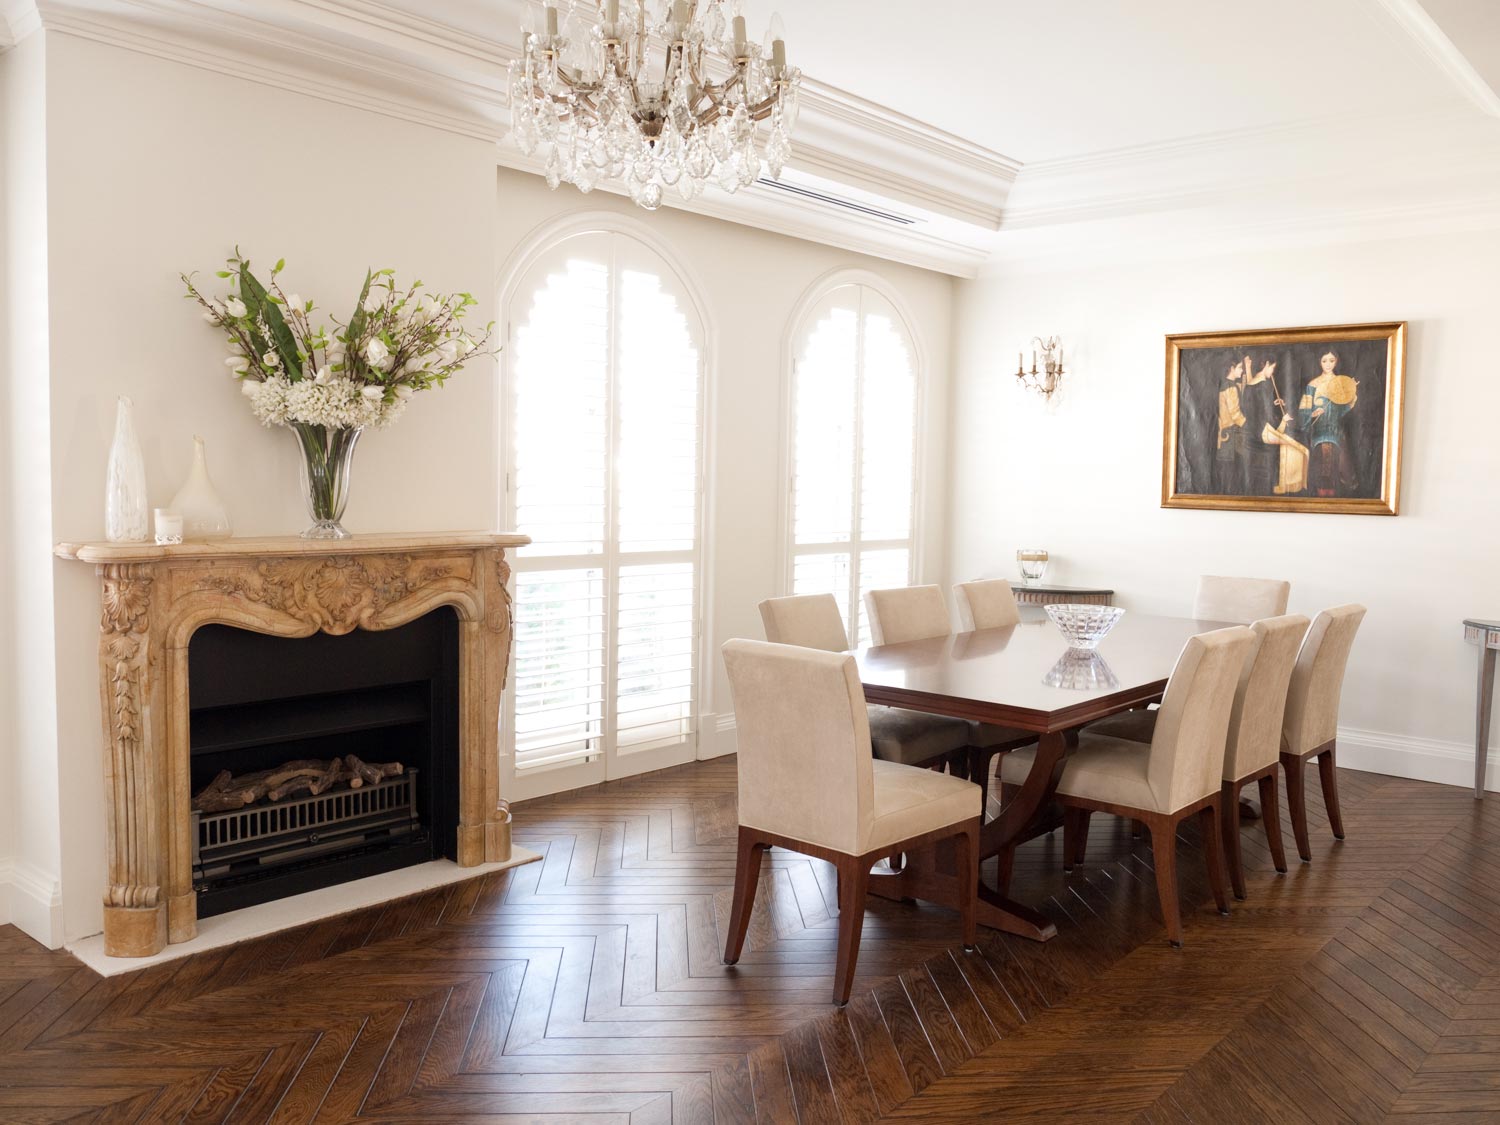 1 French dining with timber furniture, fireplace and painting